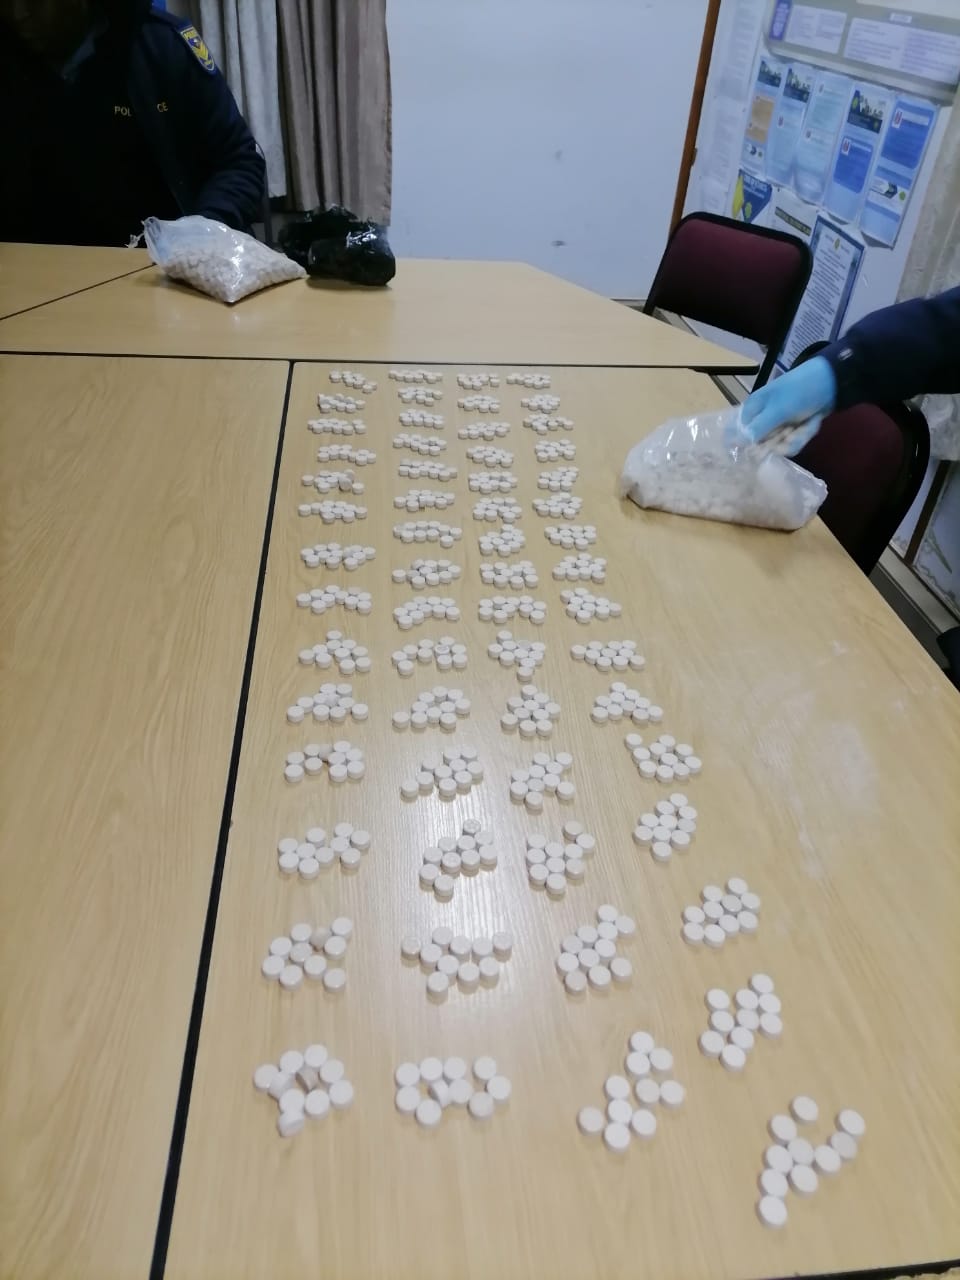 Suspect busted with drugs worth more than R121 000